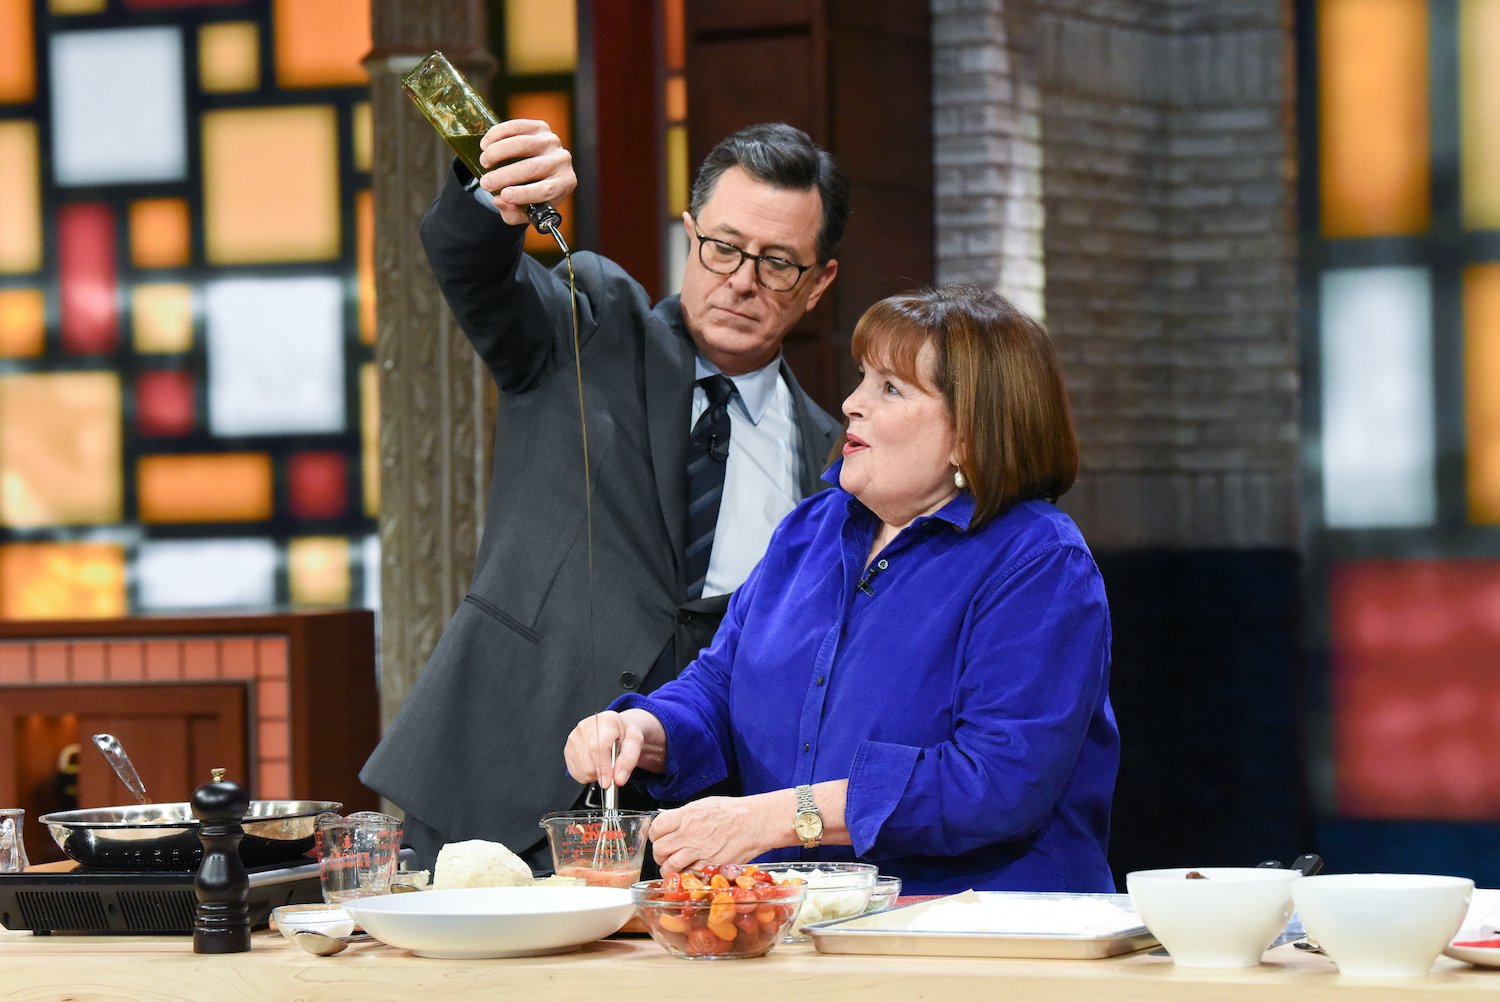 Ina Garten’s Easiest Side Dish Was a Best Seller at Her Barefoot Contessa Store